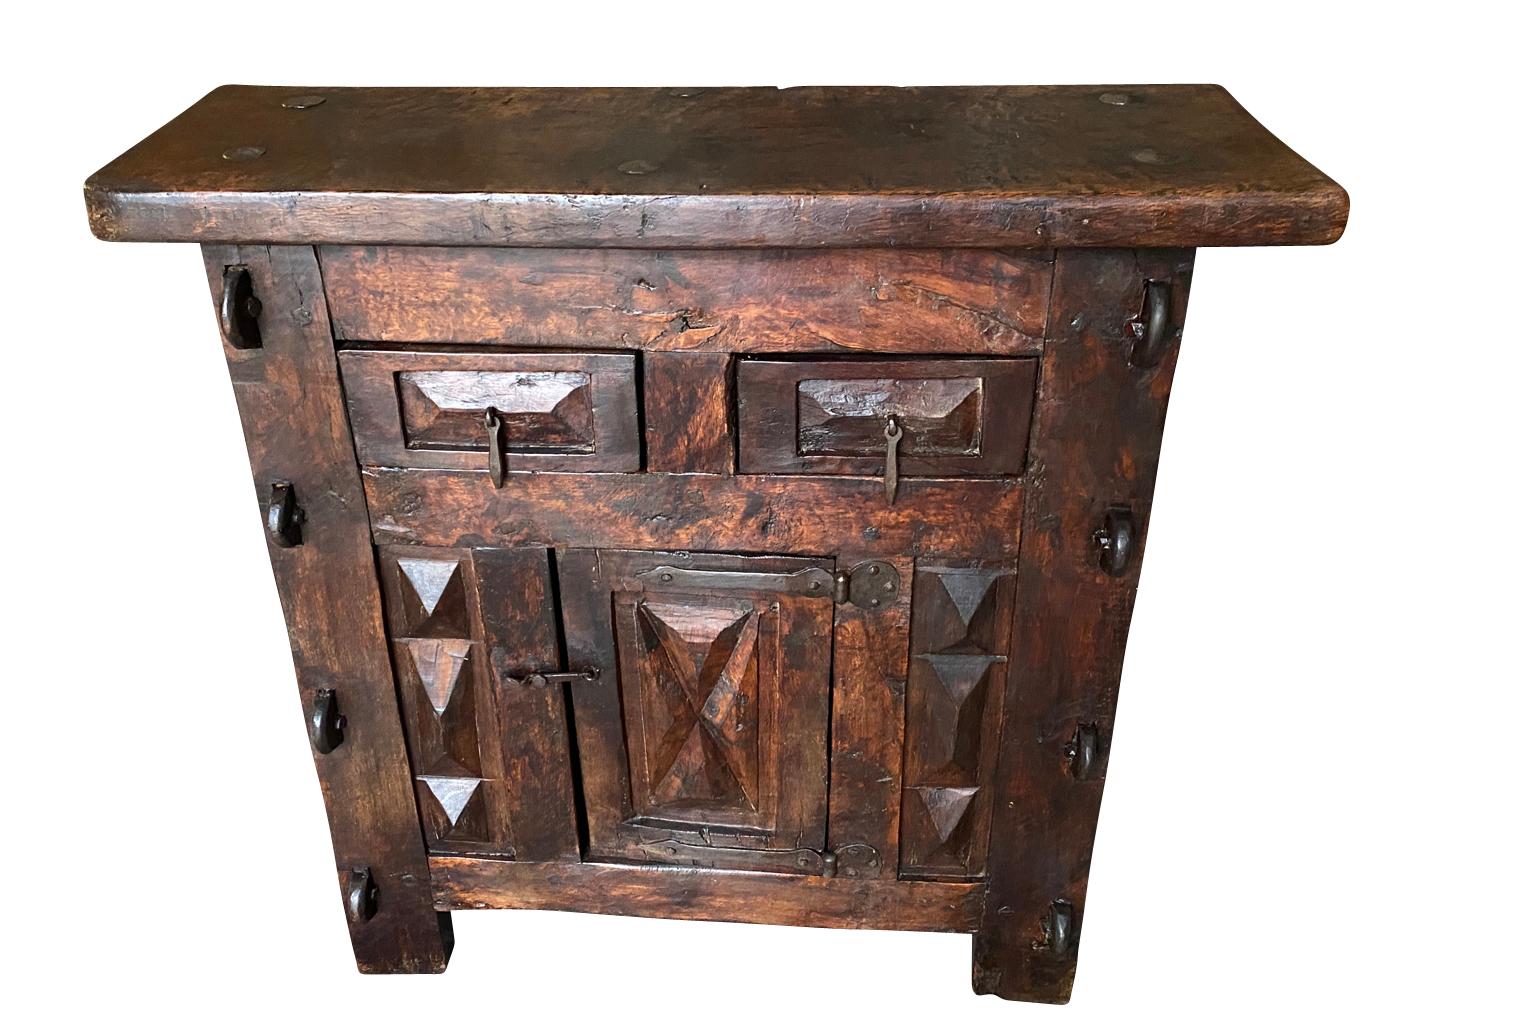 A fantastic late 17th century Buffet from the Spanish Pyrenees region.  Wonderfully constructed in richly stained oak with 2 drawers and a single door with beautifully sculpted panels and handsome hardware throughout.  Super patina - rich and